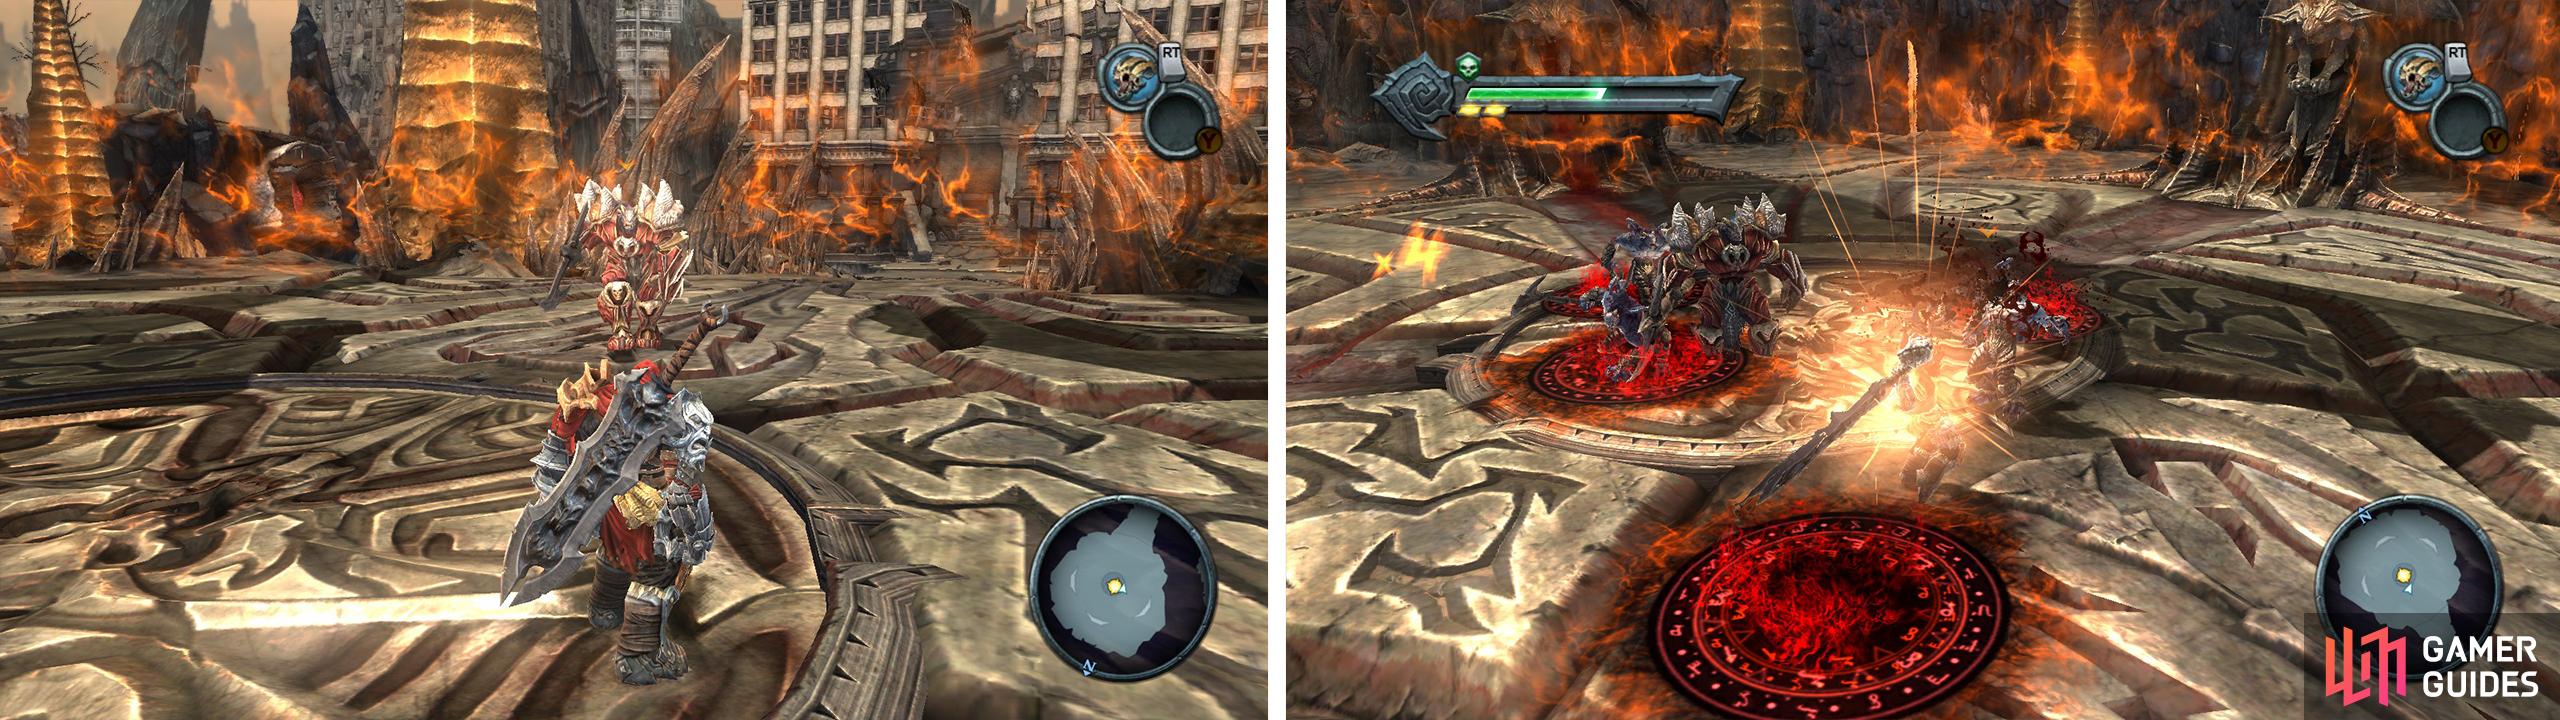 The Phantom general acts like a standard melee enemy (left). Make sure you take care of his summons (right) before refocusing your attack on the boss.